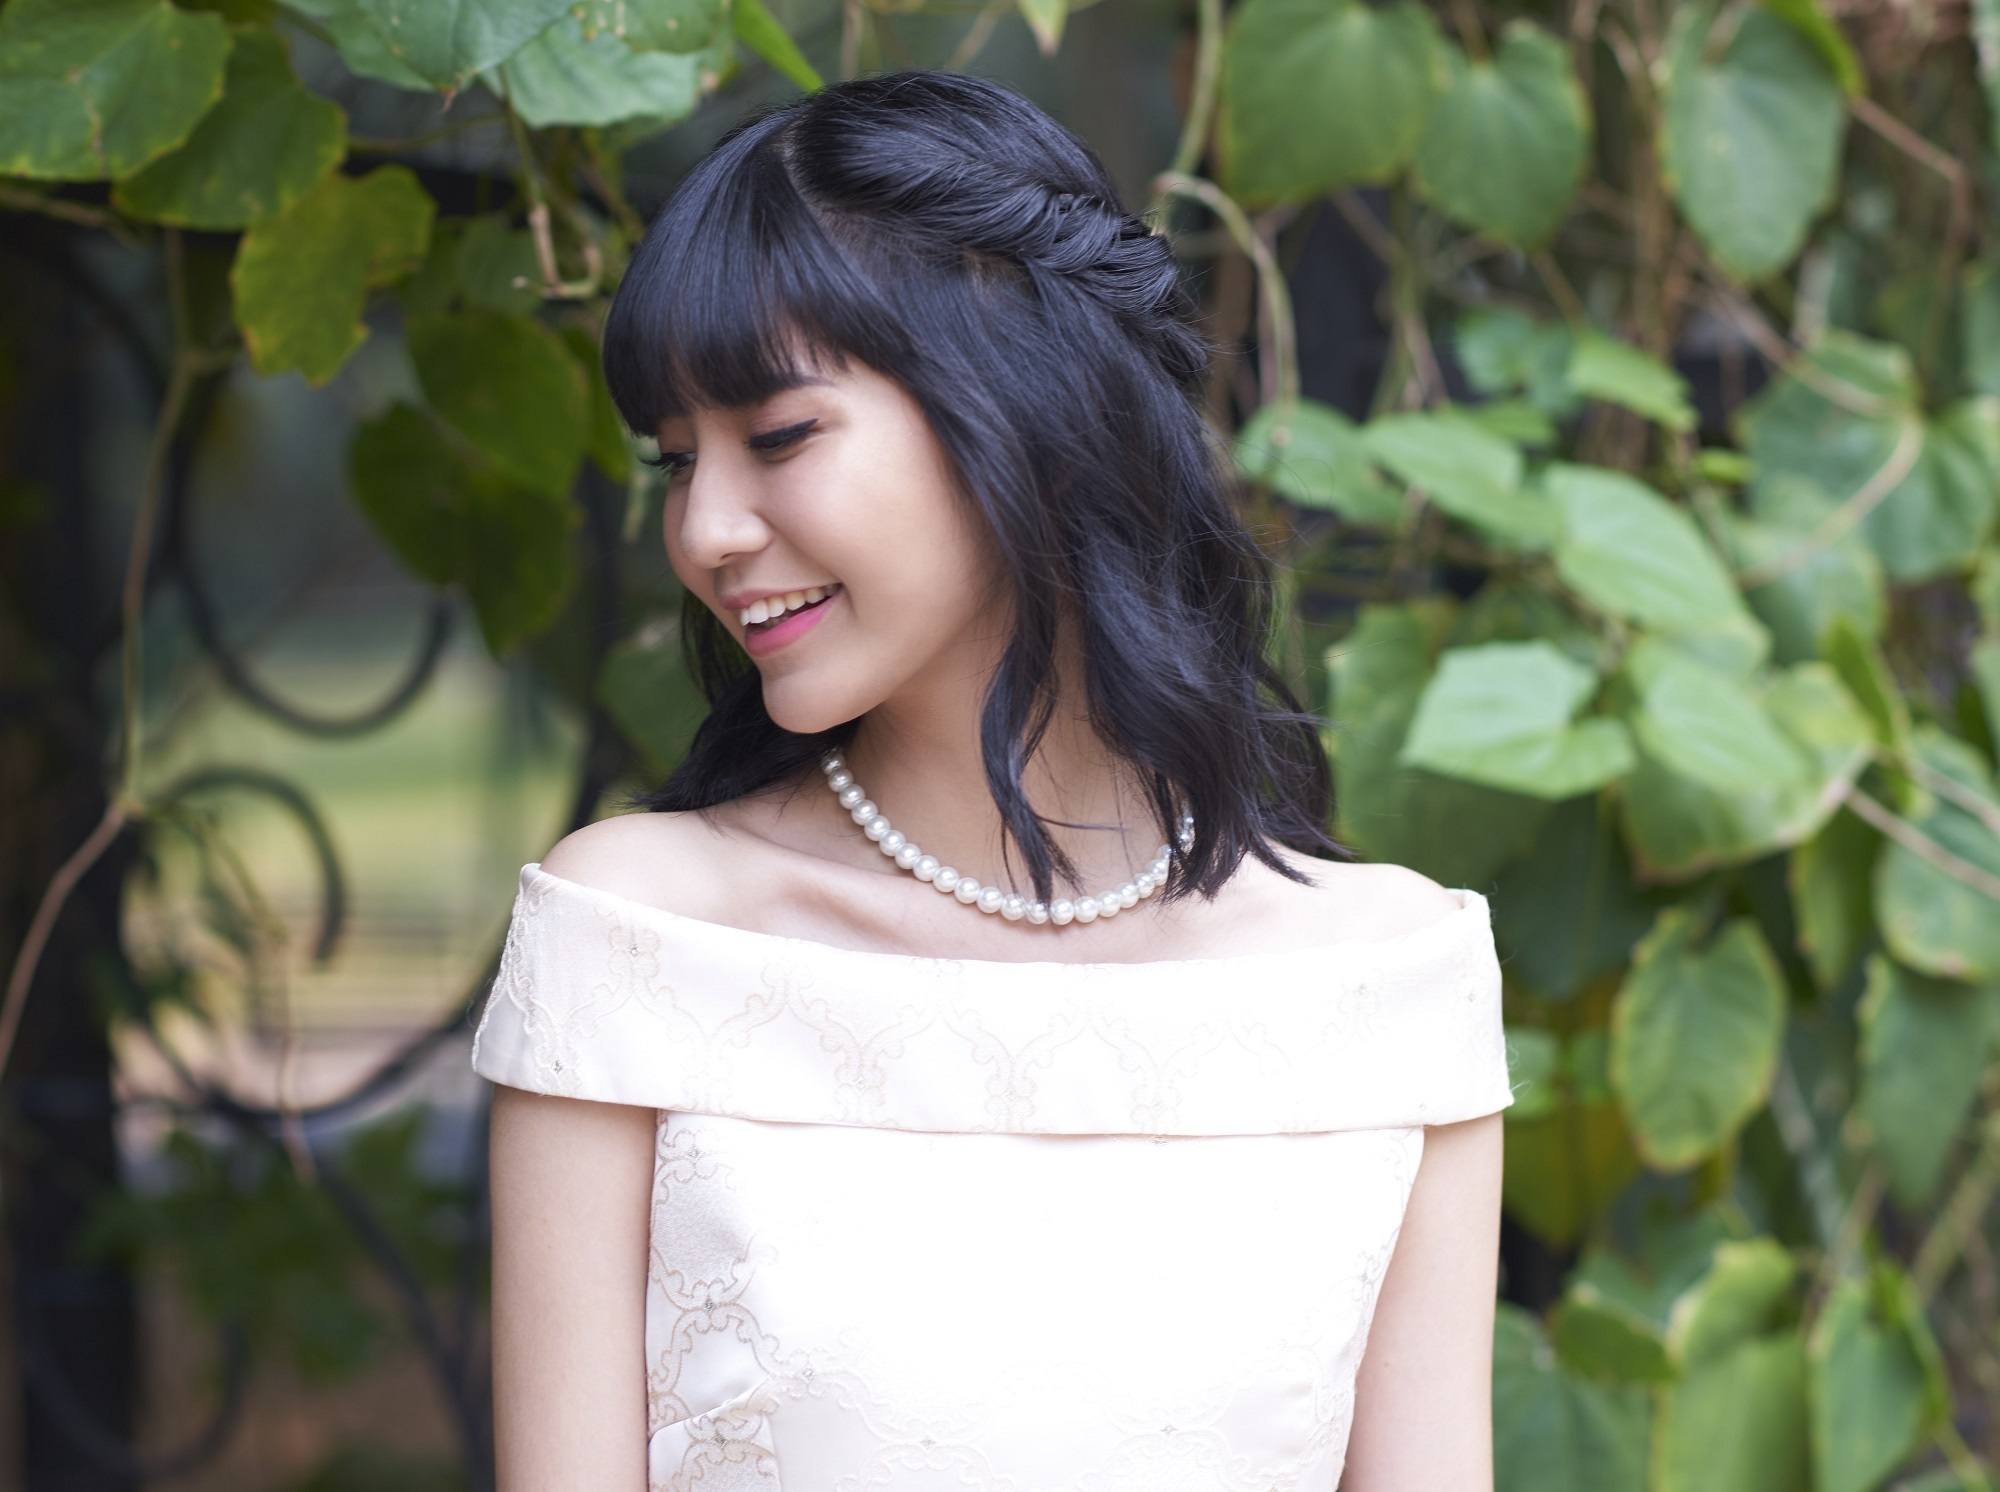 Valentine hairstyles: Asian woman wearing a peach dress with shoulder length hair in a half updo standing against a leafy gate